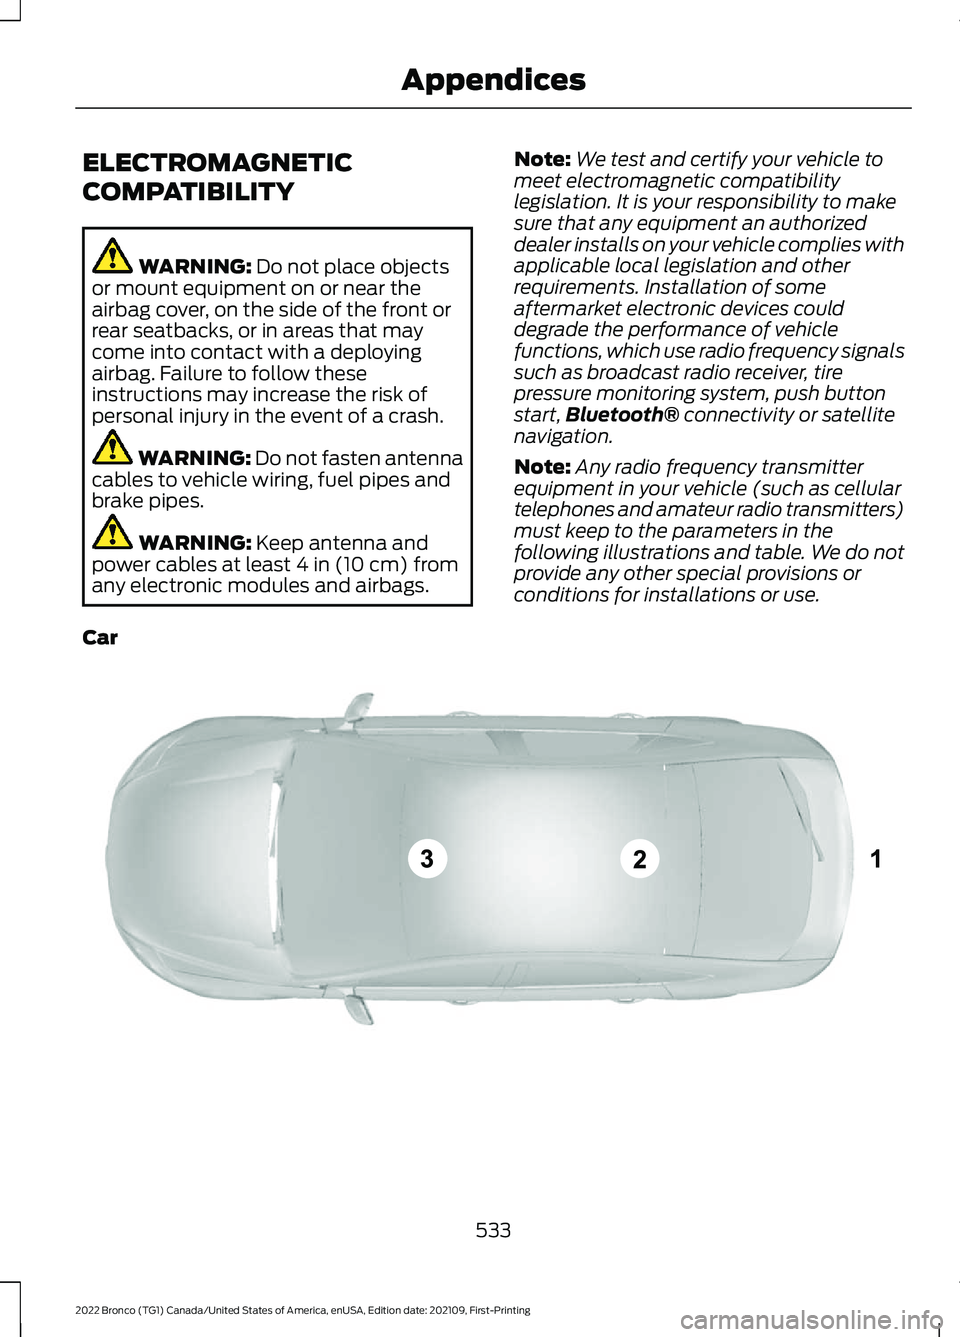 FORD BRONCO 2022  Owners Manual ELECTROMAGNETIC
COMPATIBILITY
WARNING: Do not place objectsor mount equipment on or near theairbag cover, on the side of the front orrear seatbacks, or in areas that maycome into contact with a deploy